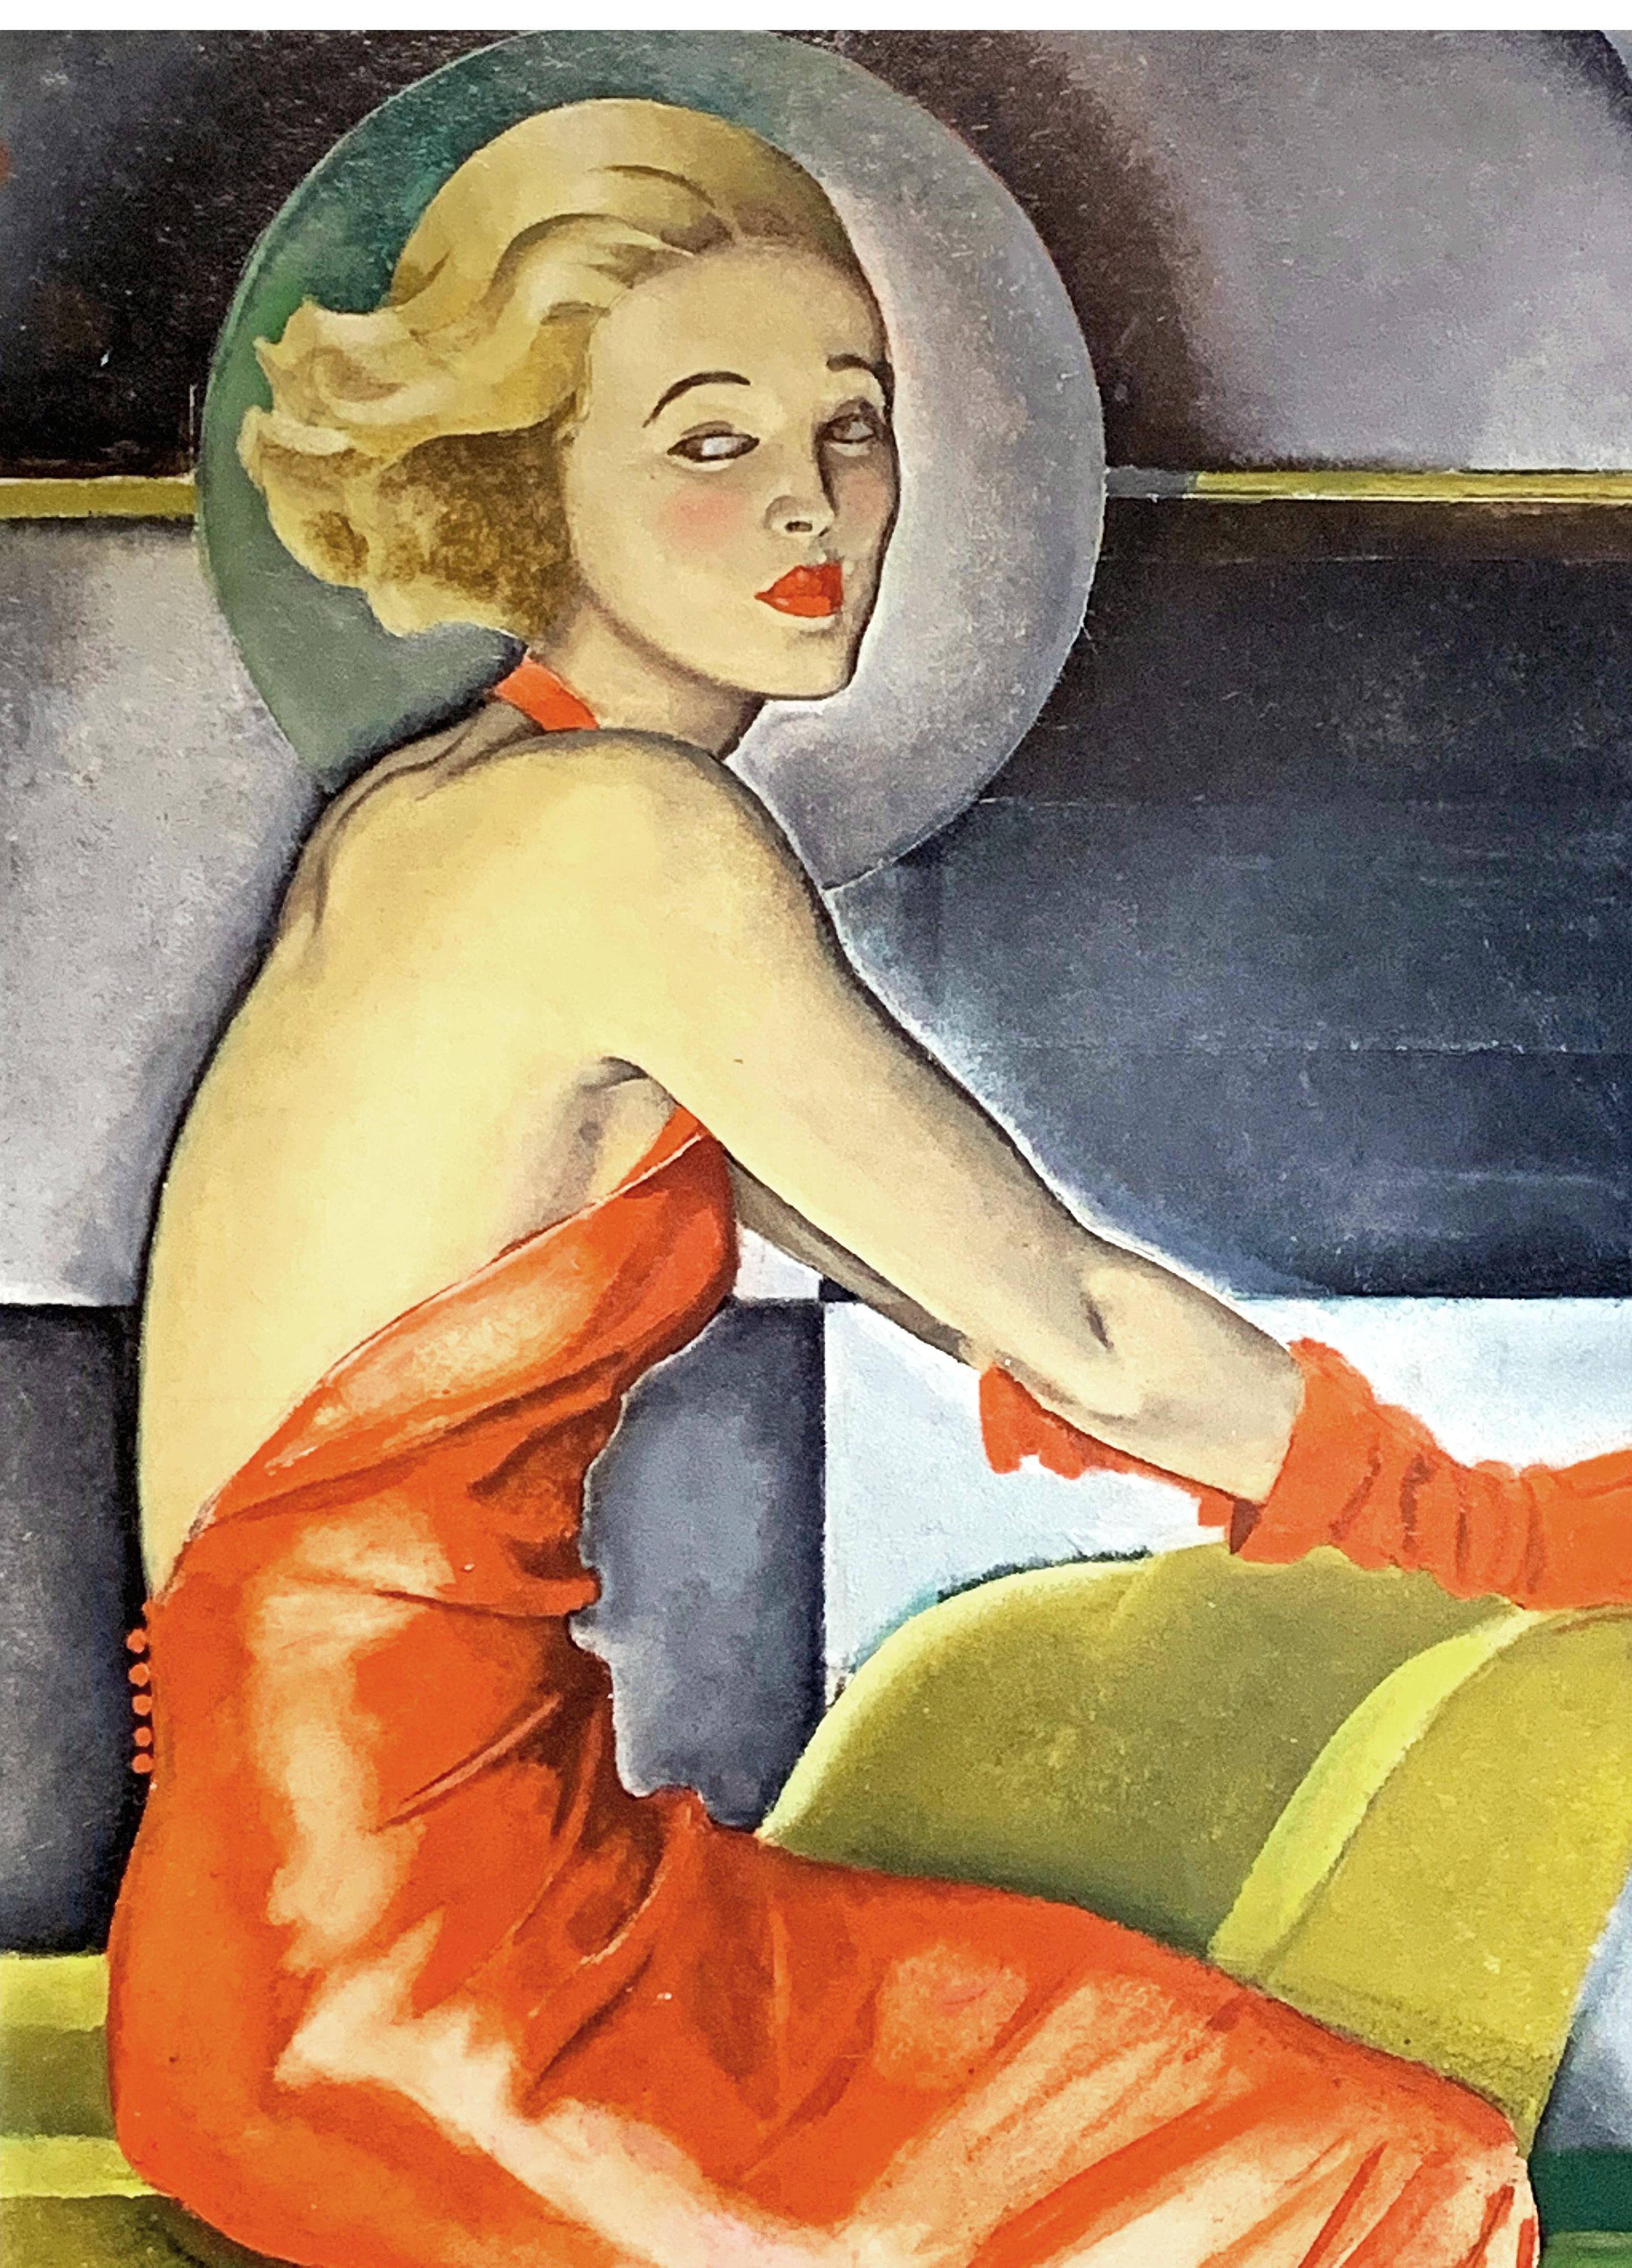 One of the most dynamic and energetic depictions of a female subject in high style Art Deco manner that we've seen, this painting was executed by Lucian Bernhard in 1939. Here his blonde figure is wearing a dress in candy apple red, surmounted by a